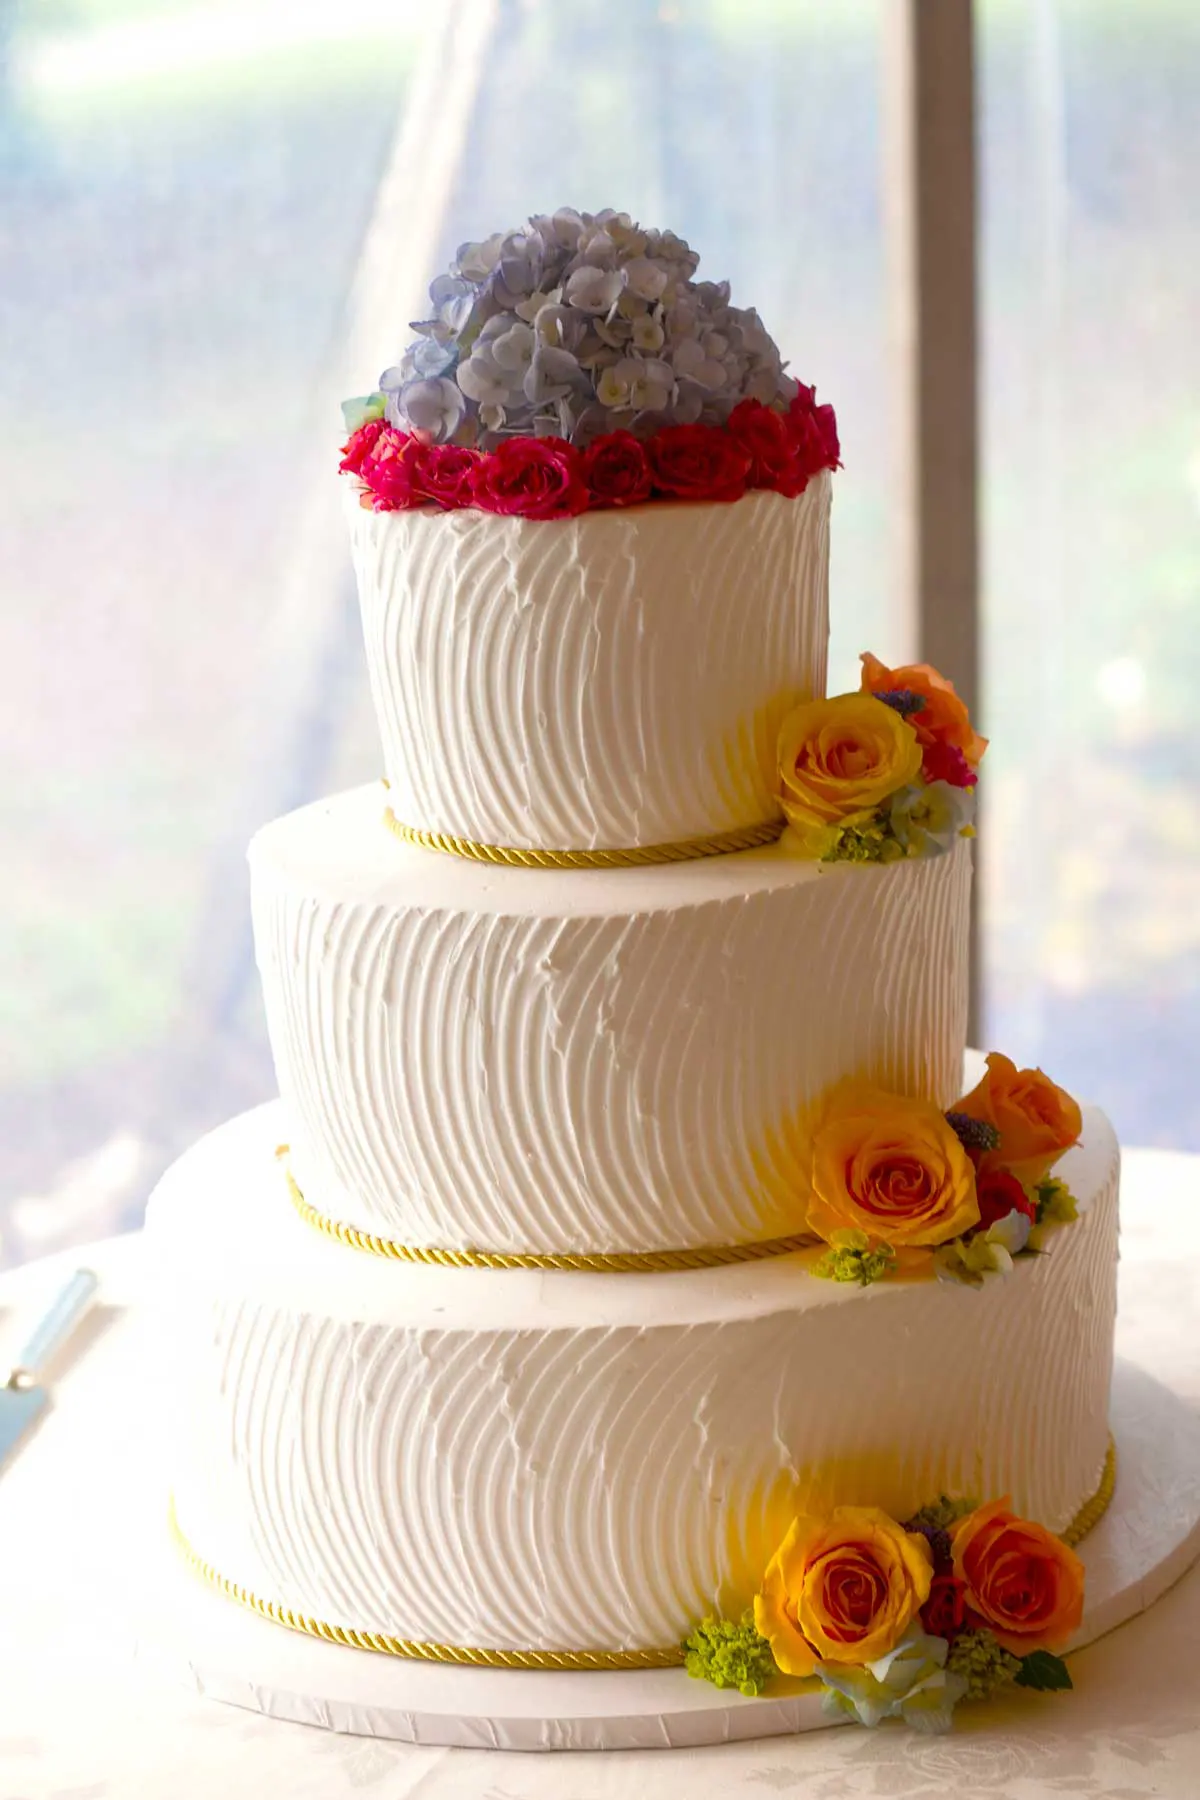 Cake - David's Soundview Catering